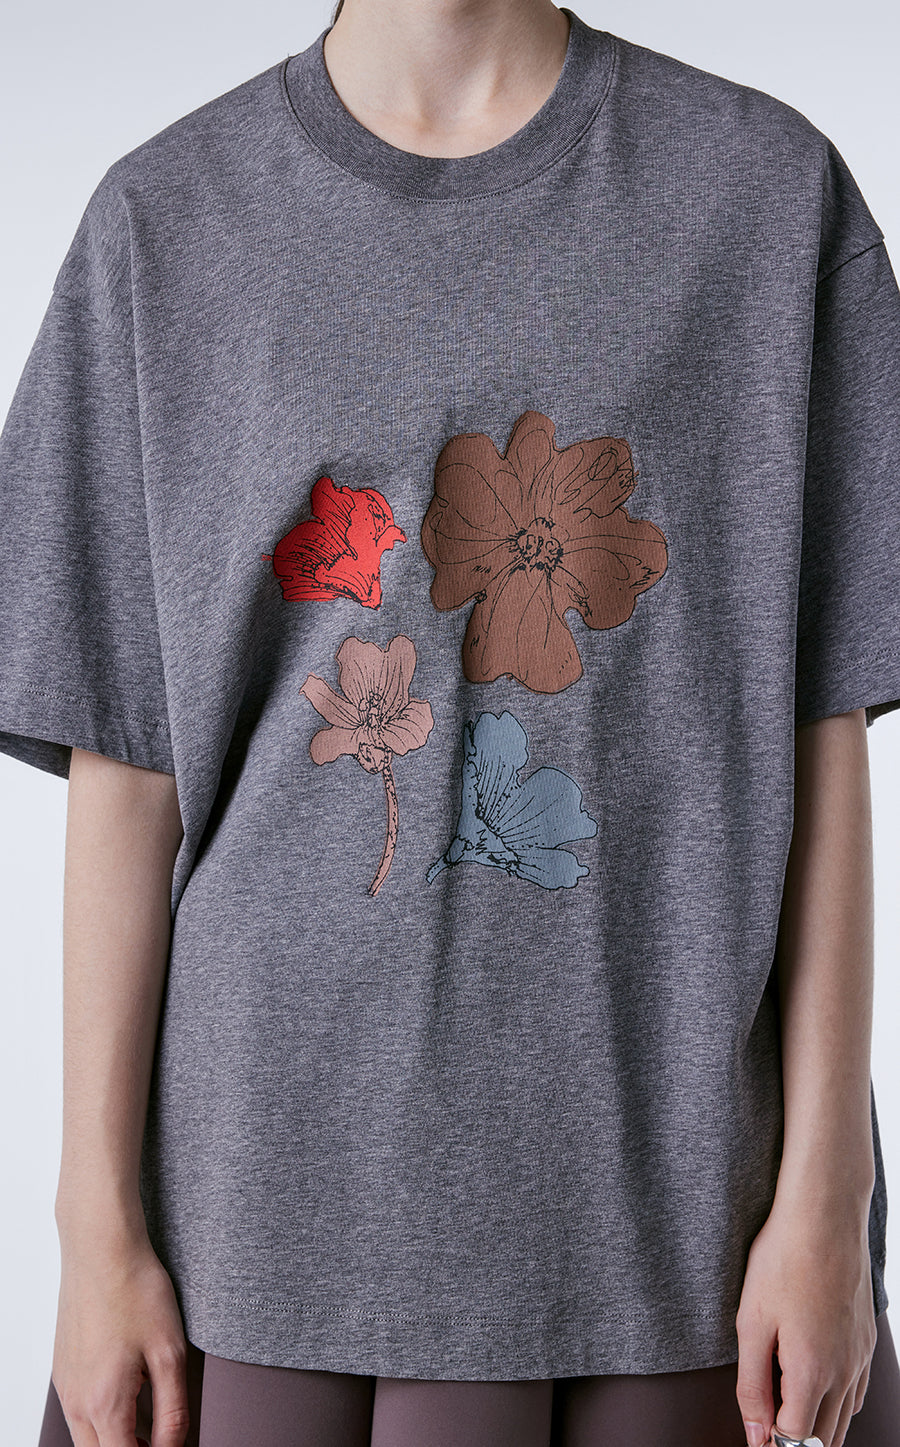 T-shirt / JNBY Miao-inspired Floral Print T-shirt